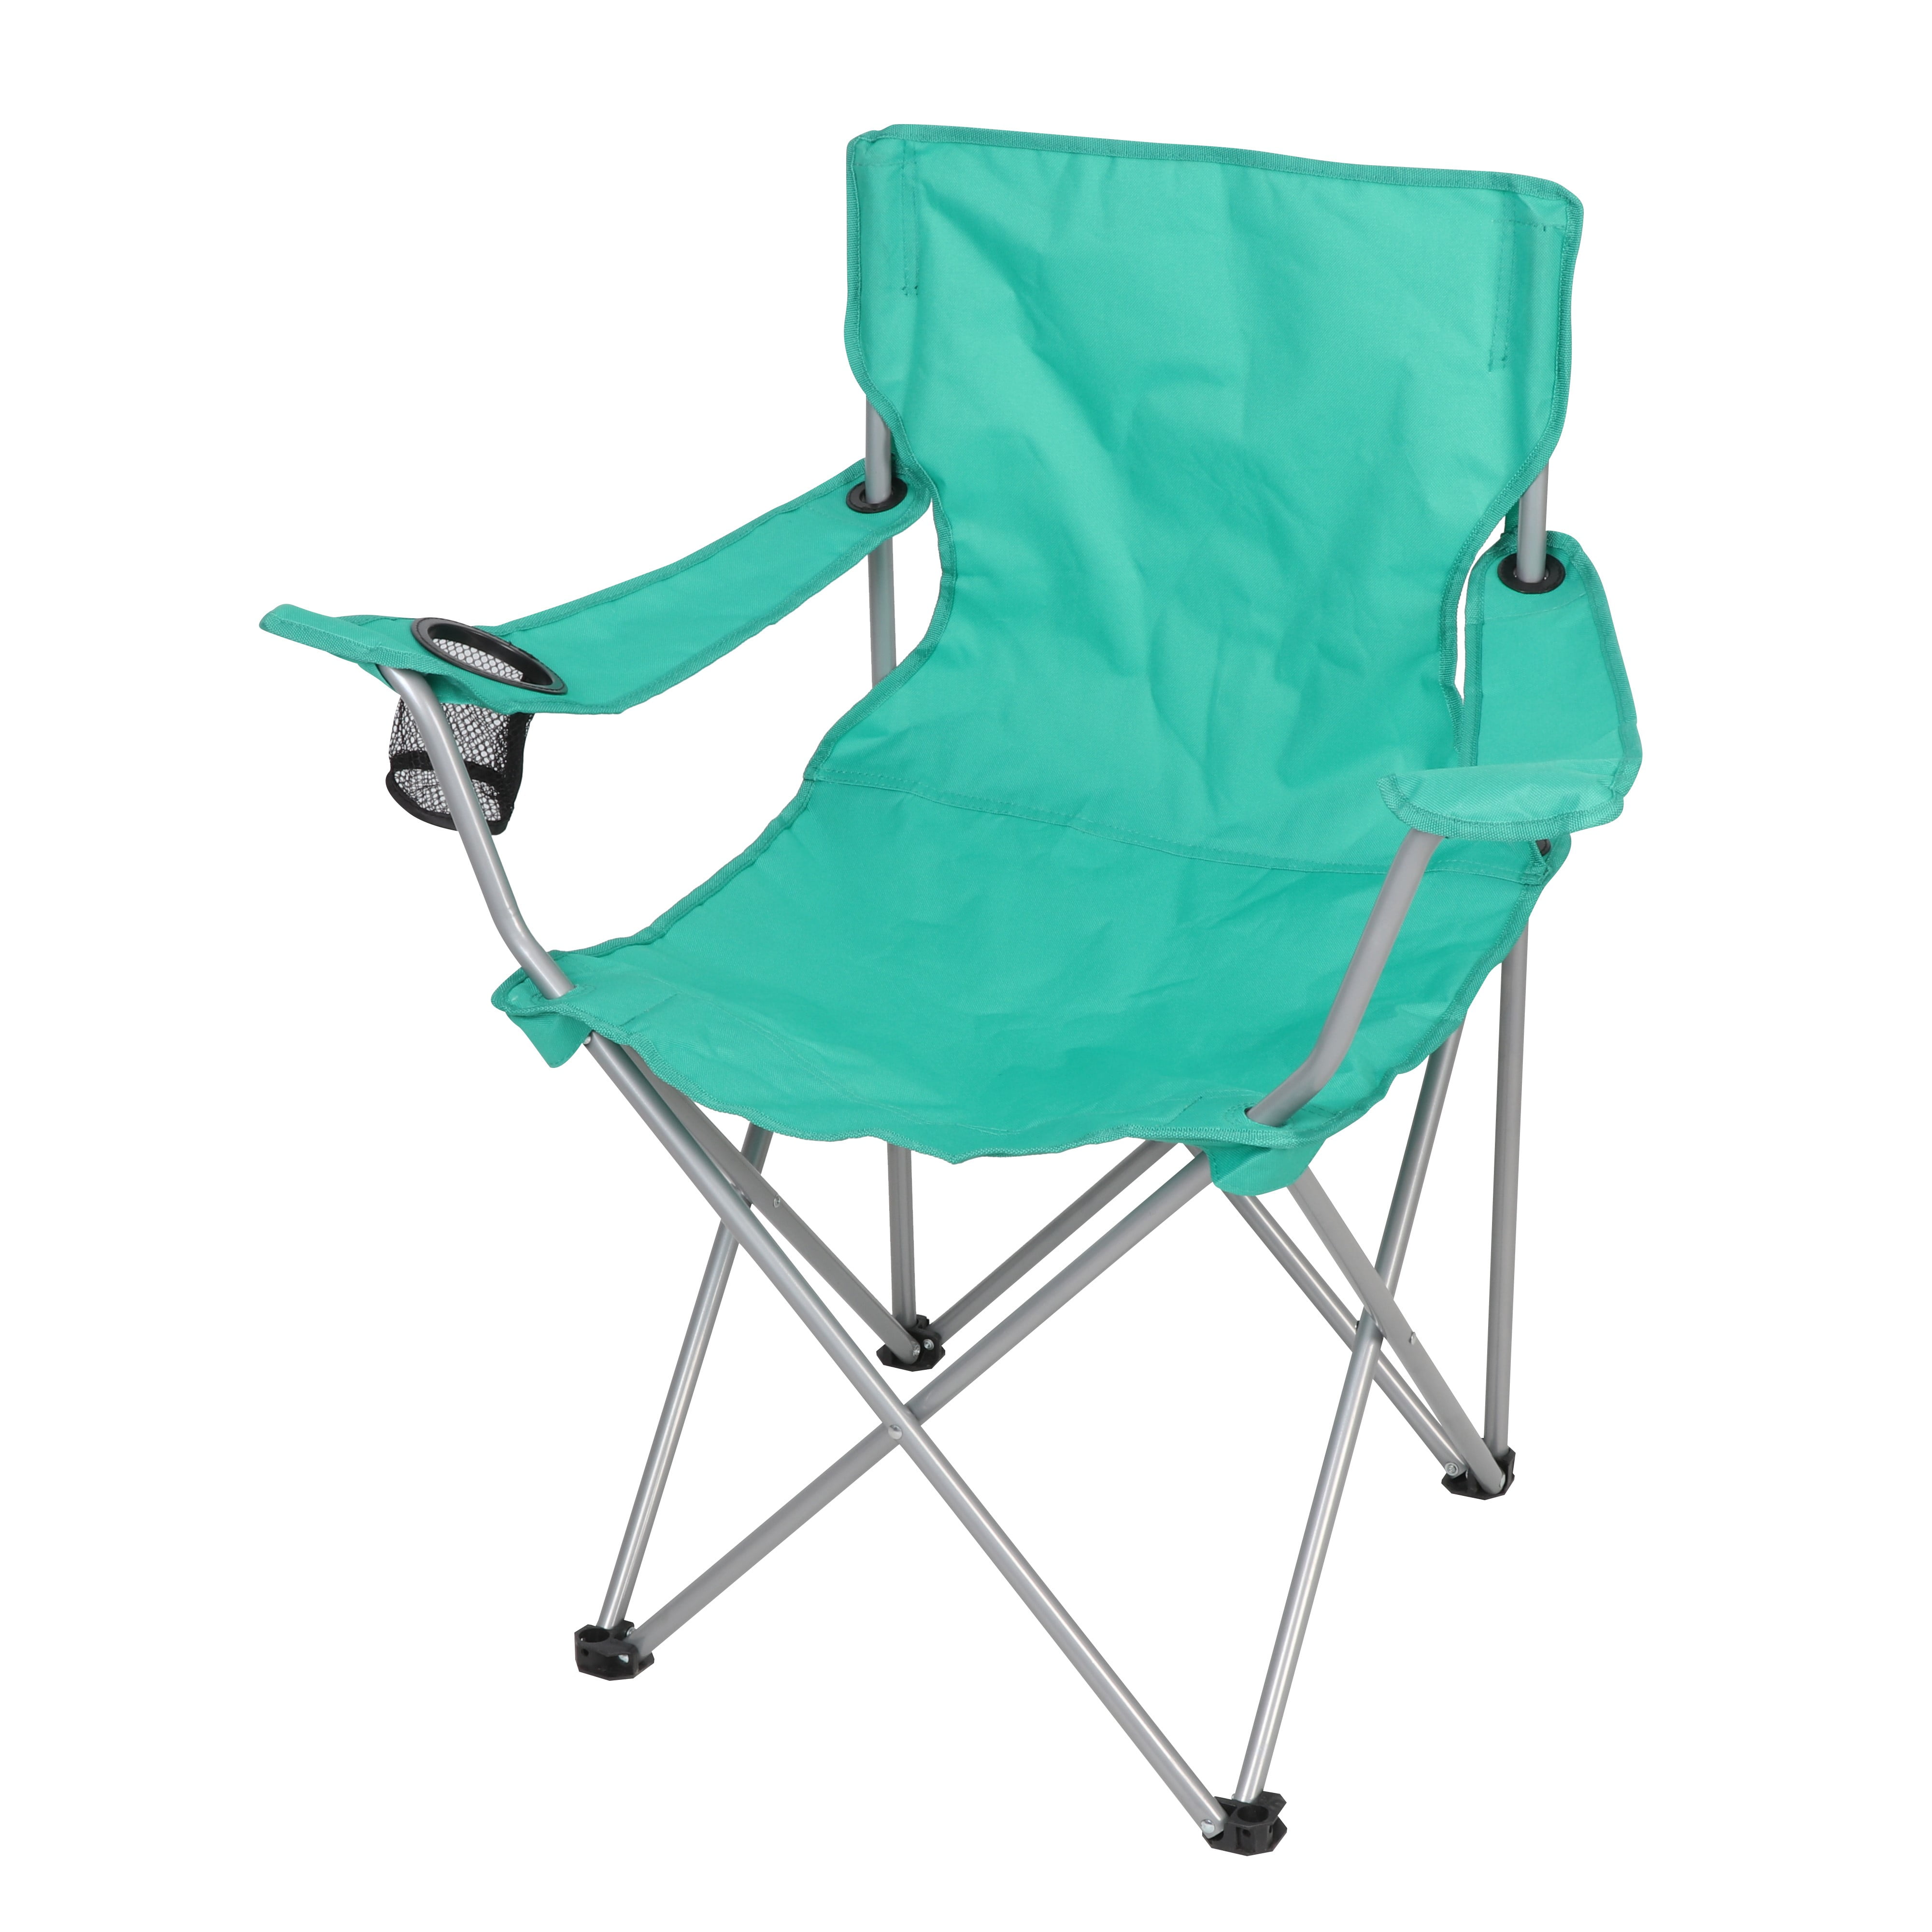 Preferred Nation Picnic Chair with Cooler 